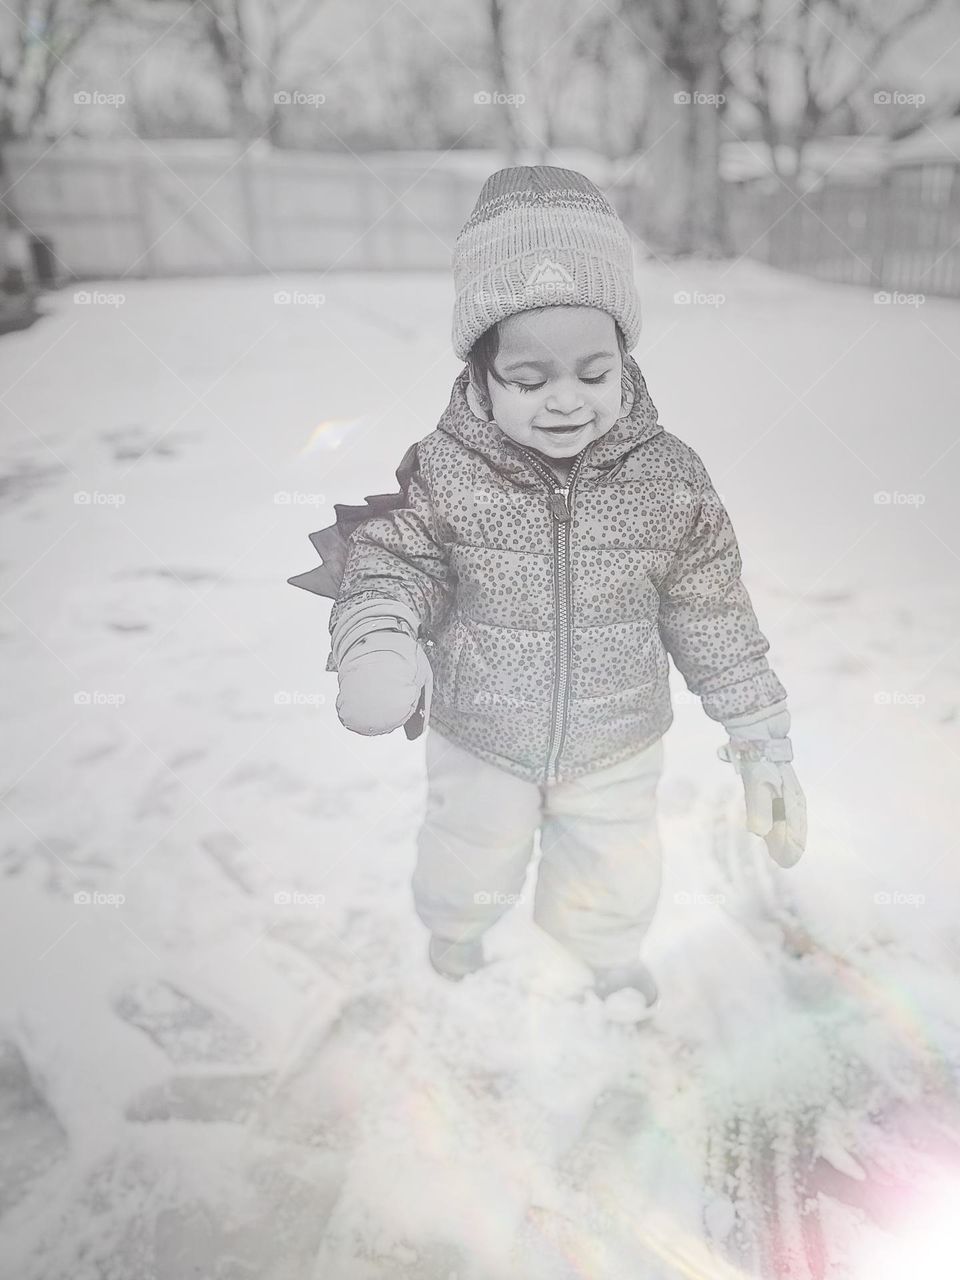 Little girl enjoying the icy artistry, toddler enjoys the winter weather, walking in the snow and ice, icy and snowy conditions 